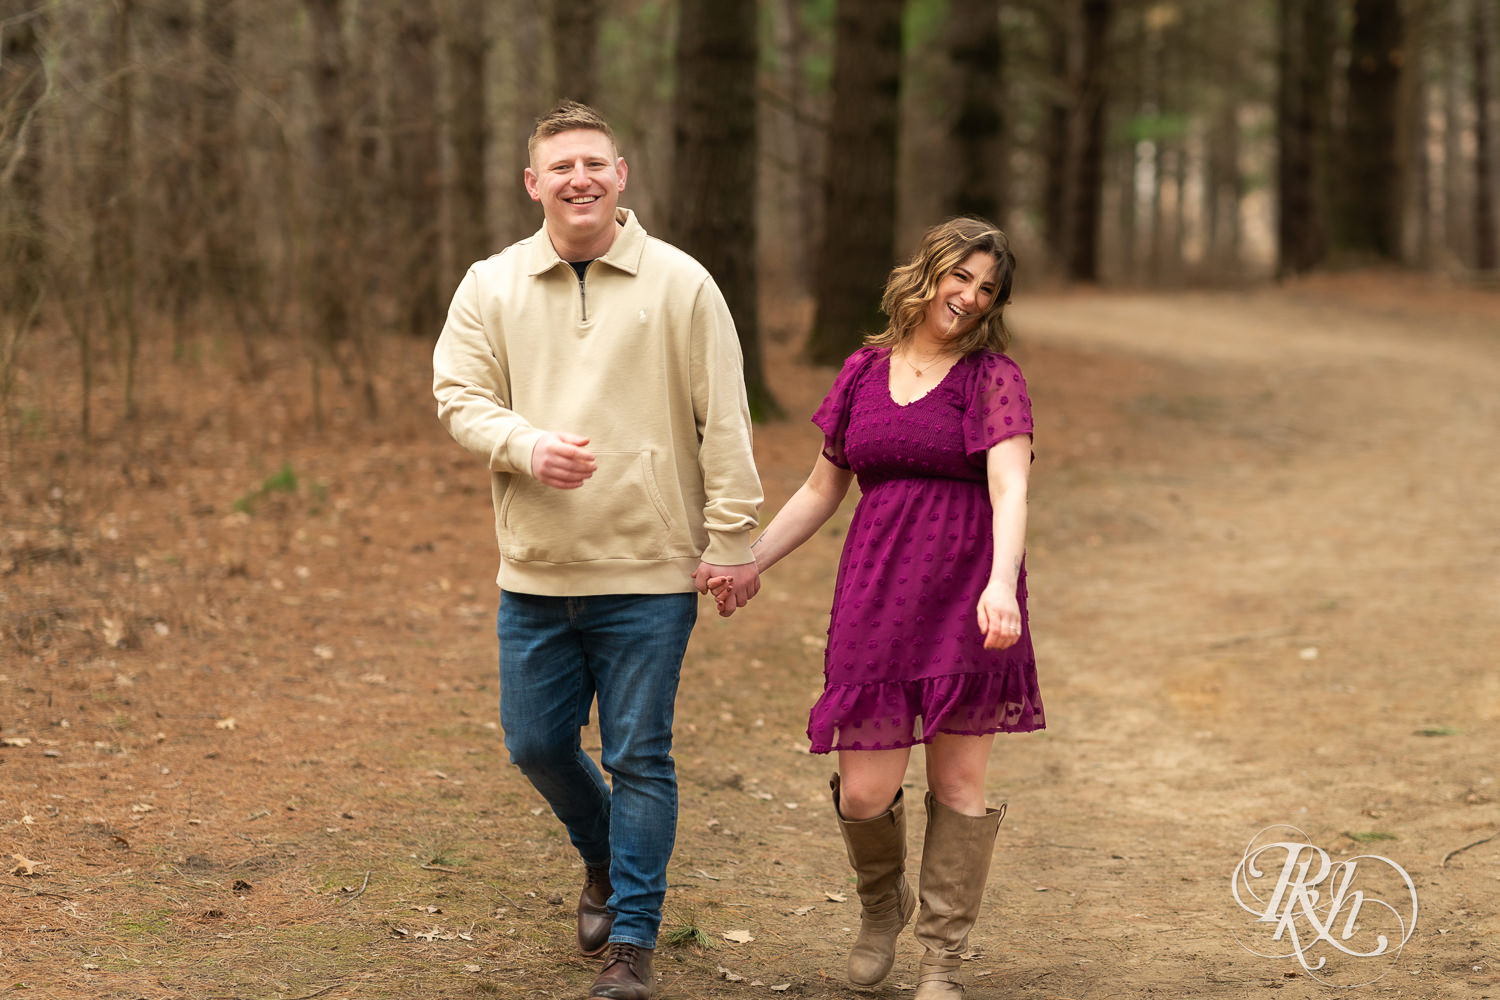 Man in jeans and woman in magenta dress laugh while walking through the woods in Lebanon Hills in Eagan, Minnesota.